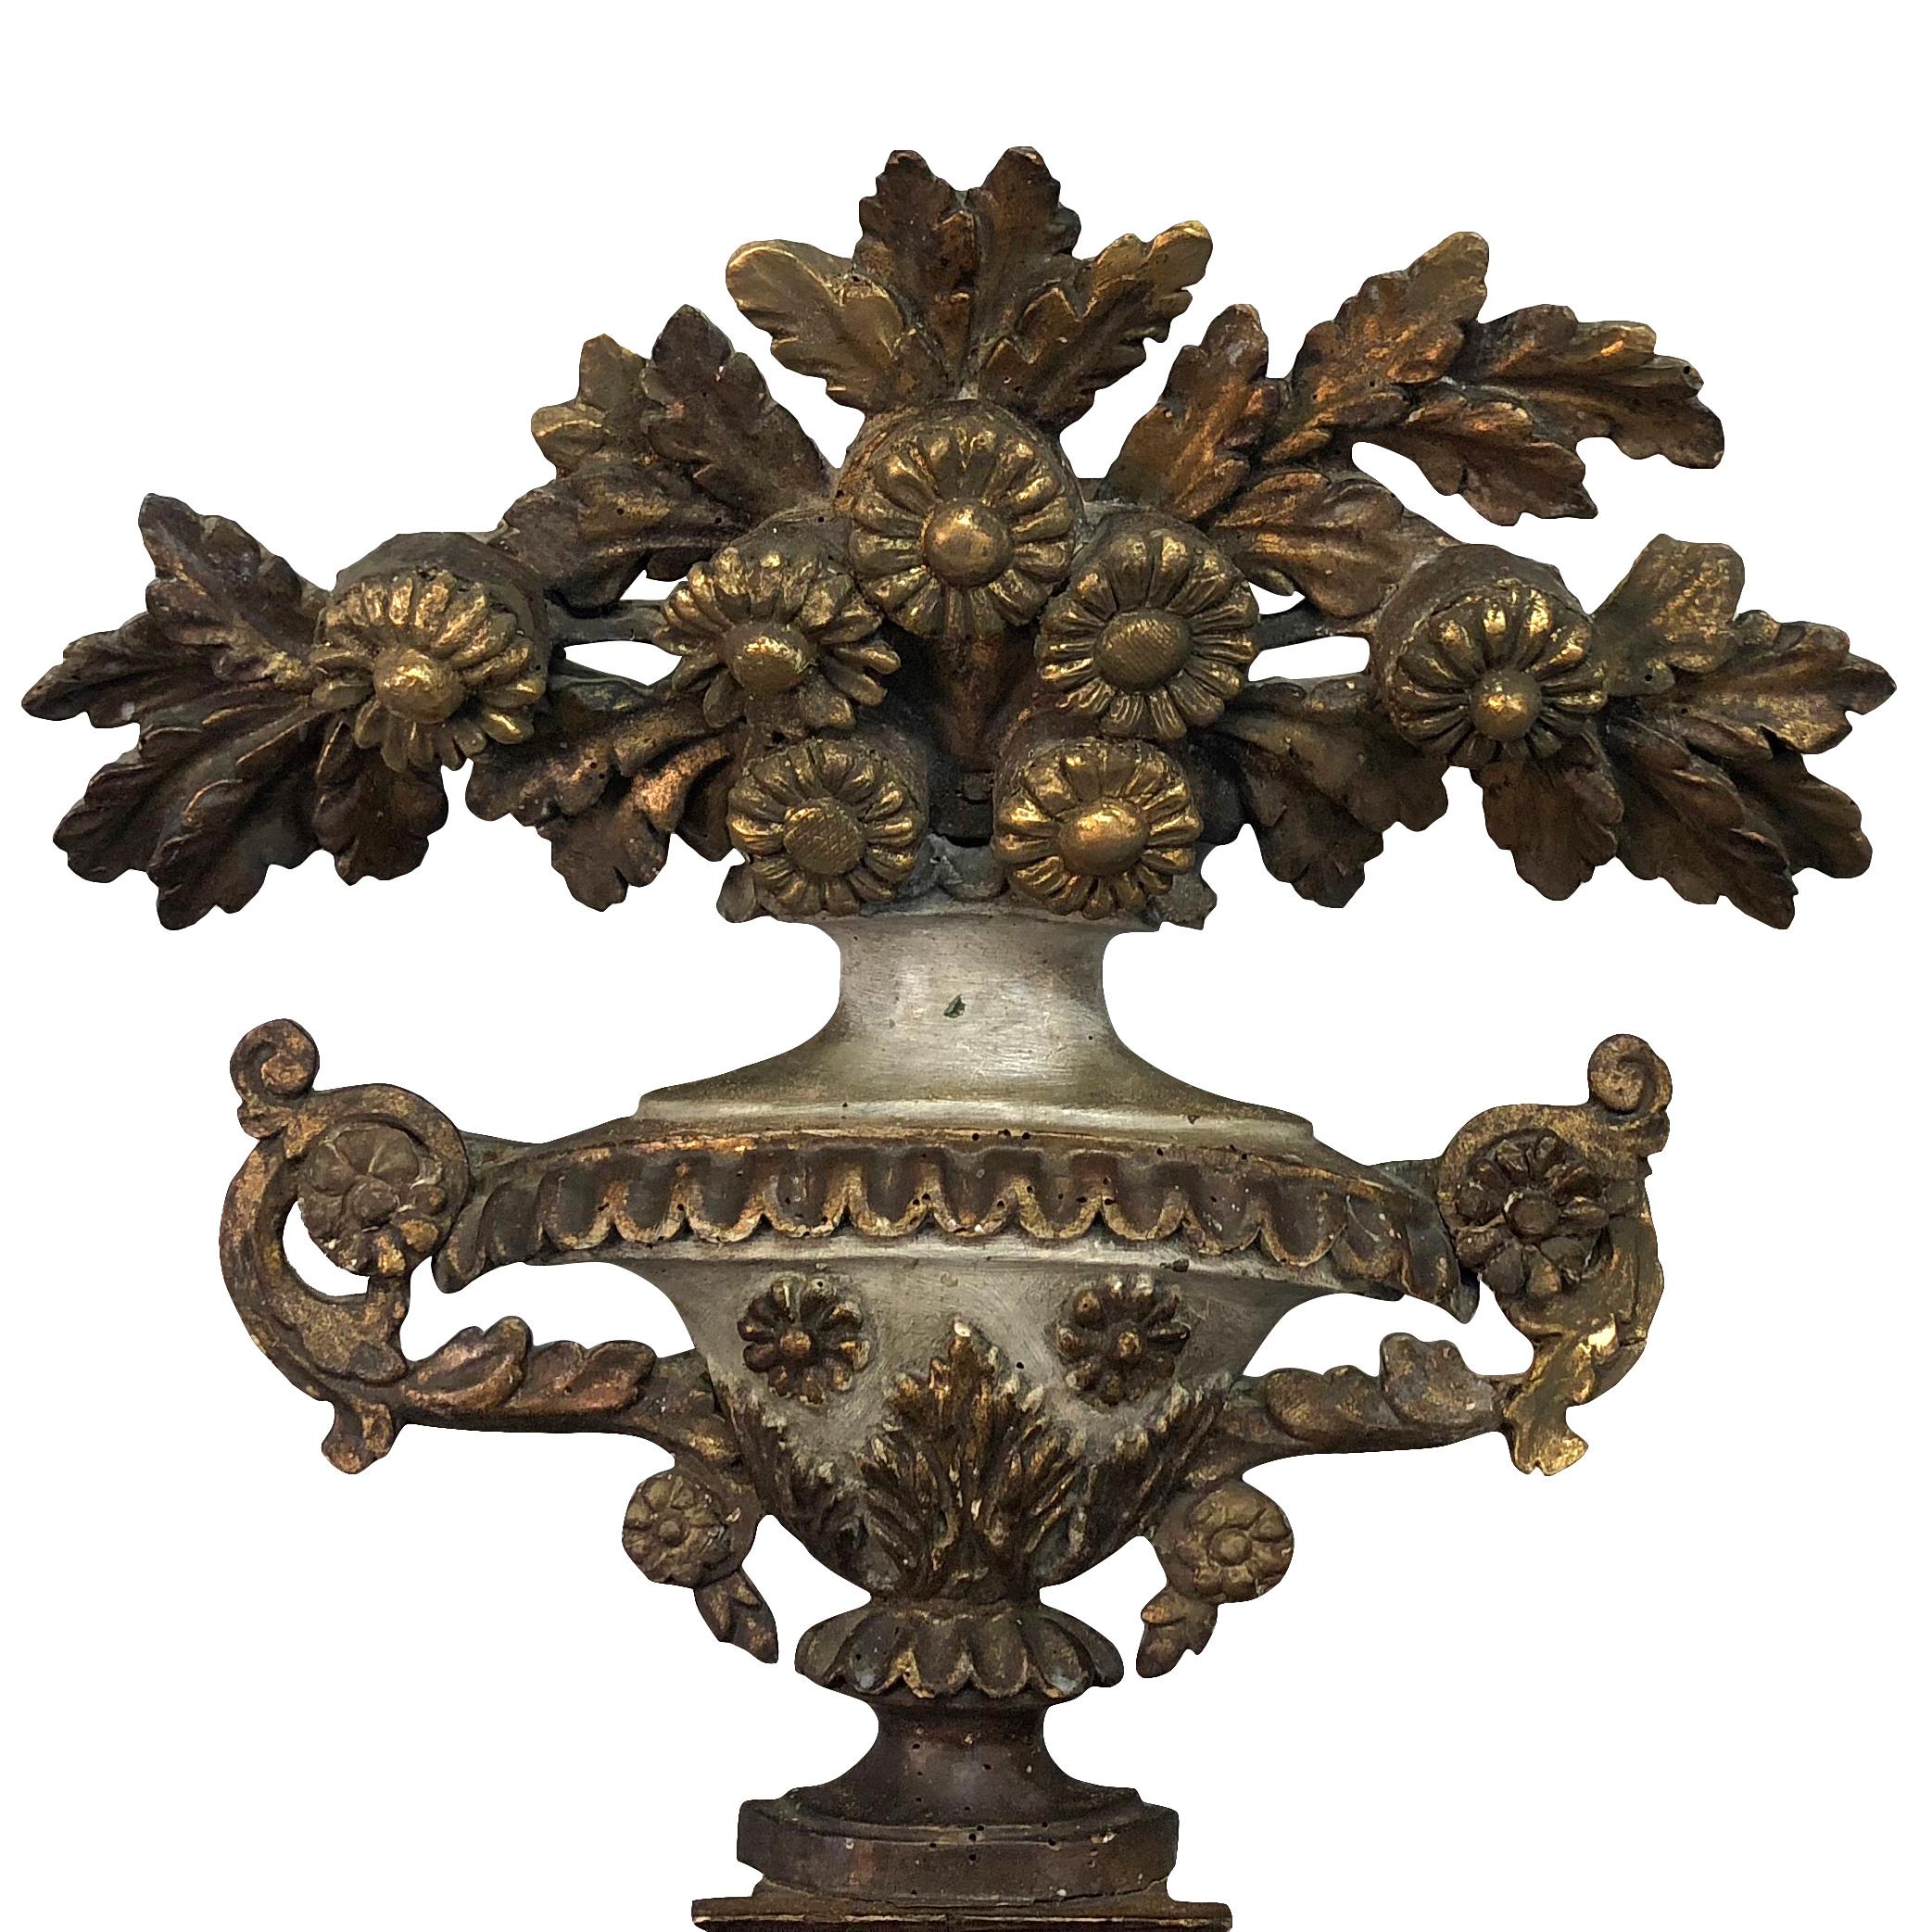 An antique hand carved Louis XVI flower arrangement made of wood, painted and gilded in an oval shape, half relief. The French wall décor is in good condition. Wear consistent with age and use, circa 1790, France.